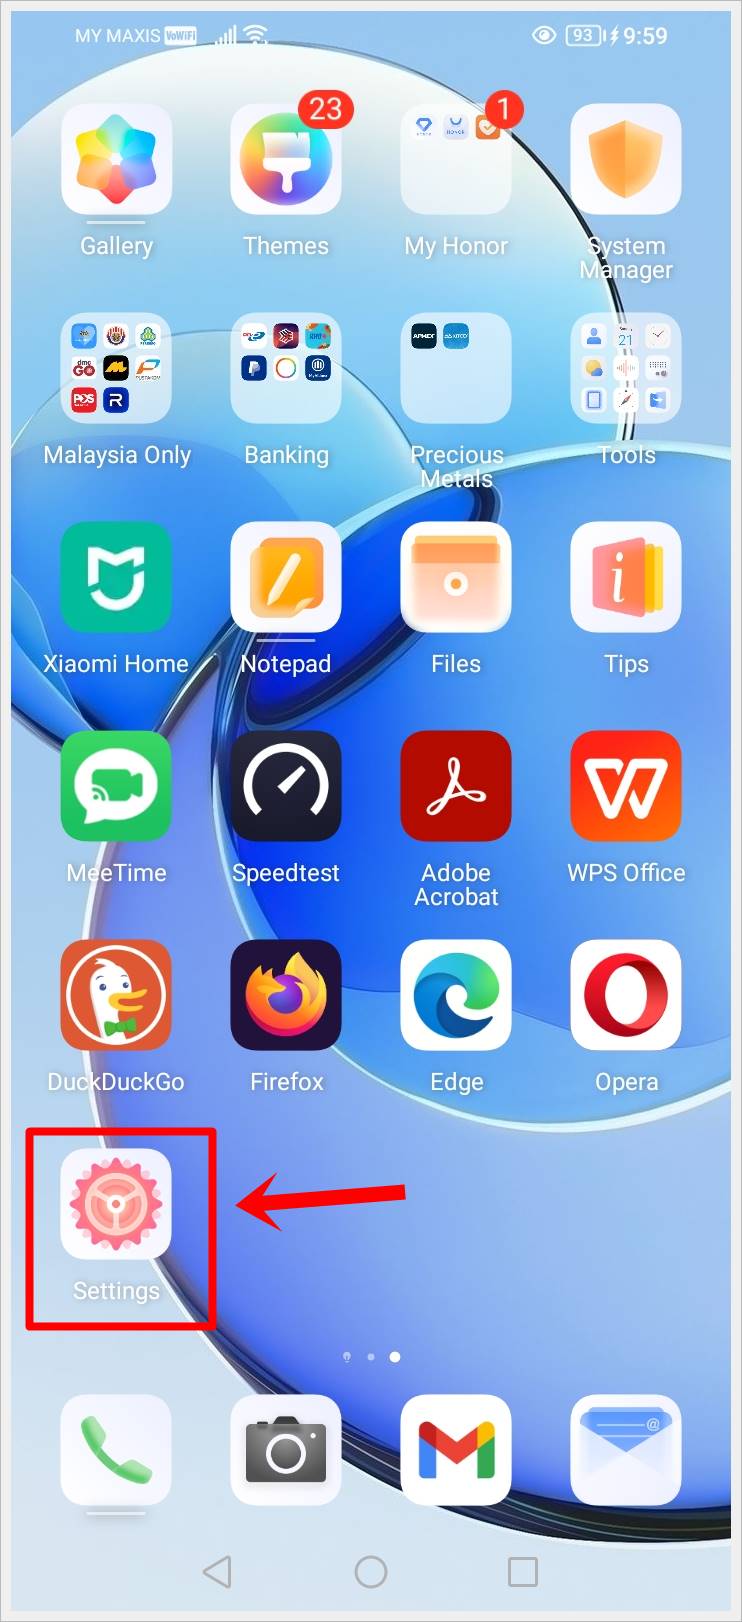 This image shows a screenshot of an Android phone with its 'Settings' icon highlighted.